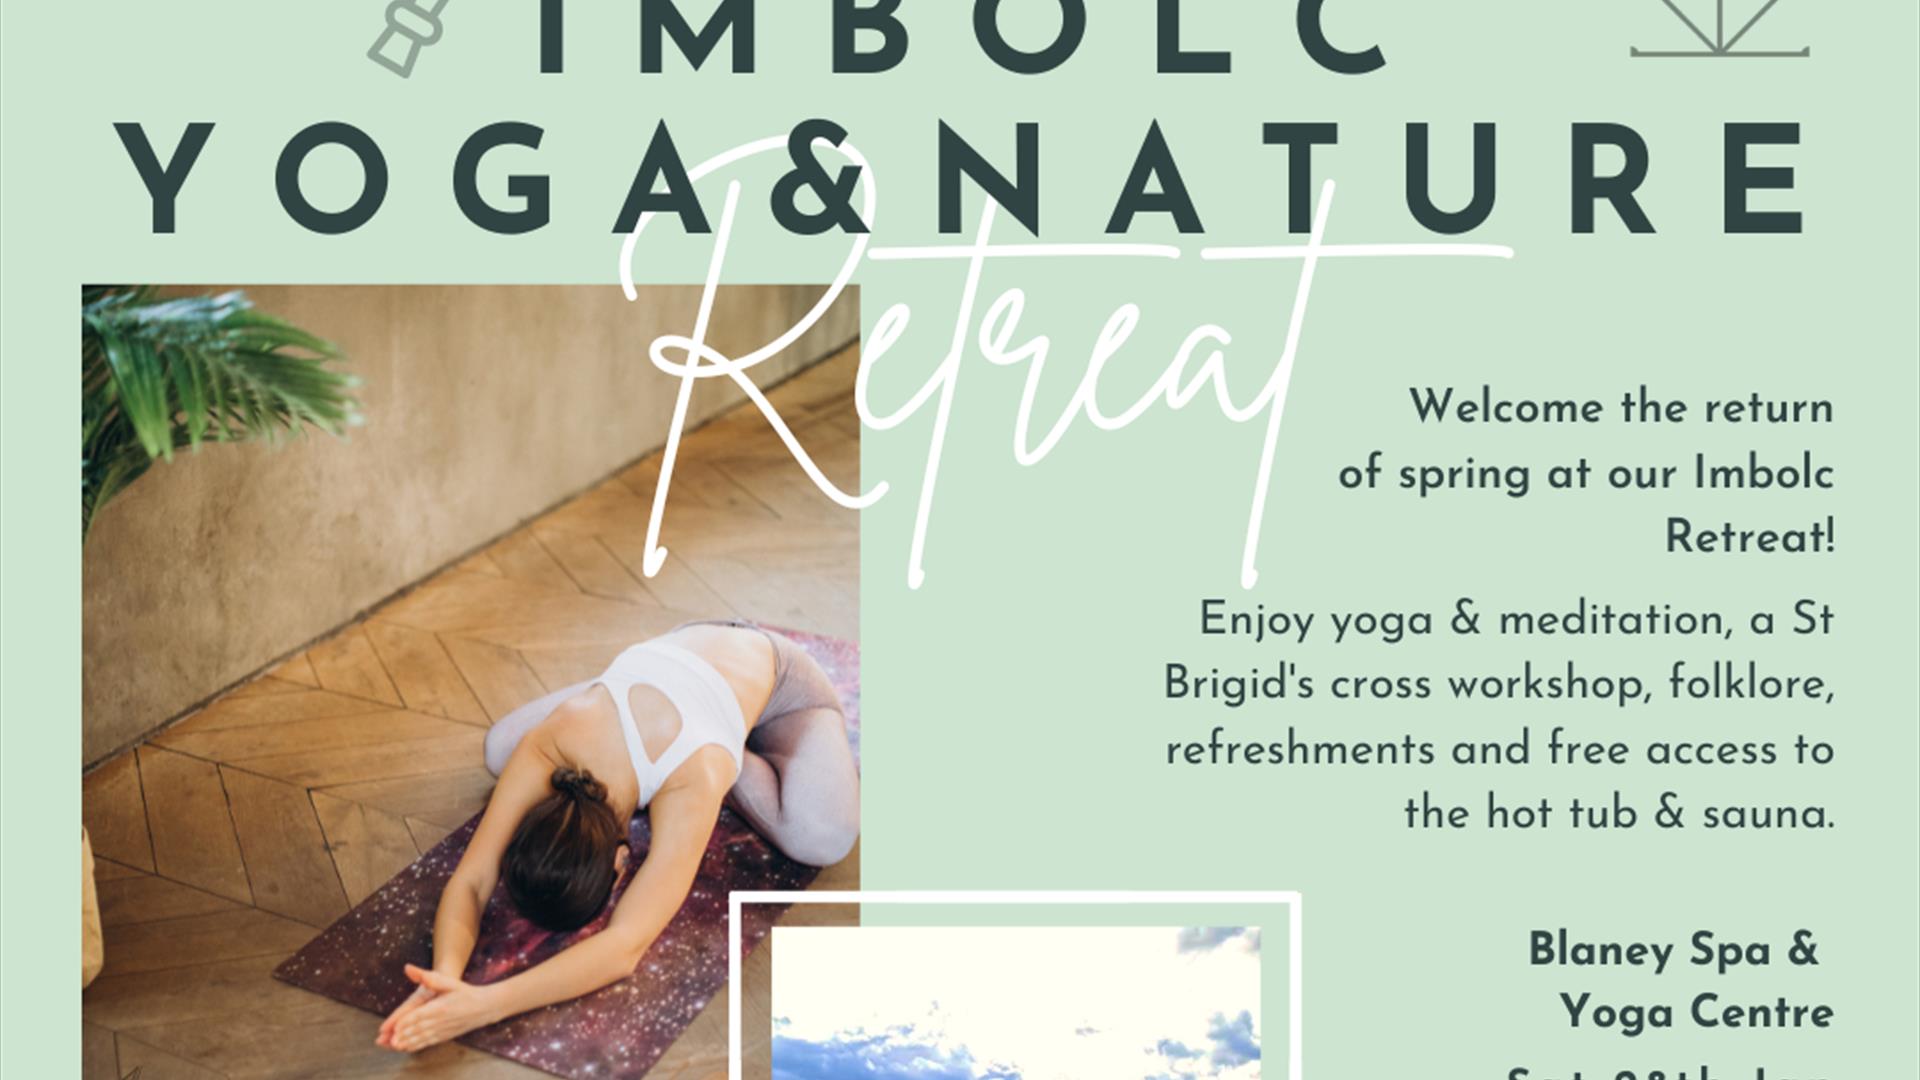 The image shows a poster promoting the retreat. There are 2 pictures, one of a person partaking in yoga, the other of a calm lake. There is informatio